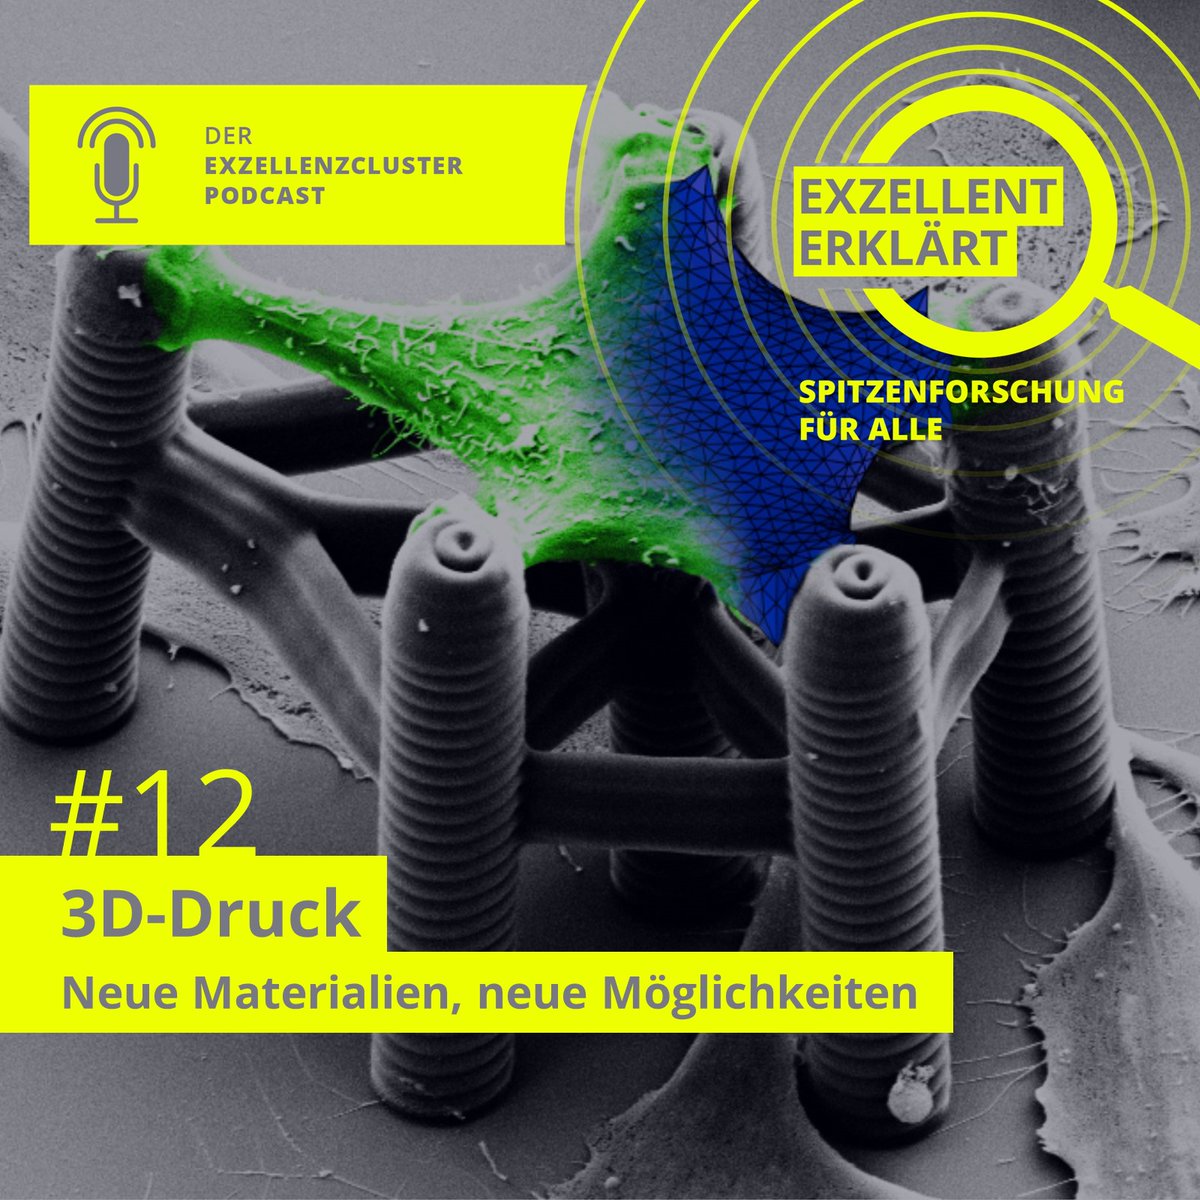 The new episode of '#exzellenterklaert – Spitzenforschung für alle” is out now and features the Cluster 3DMM2O! Listen in and learn how research areas as diverse as #Organoids and #Metamaterials benefit from state-of-the-art 3D printing. exzellent-erklaert.podigee.io/12-neue-episode